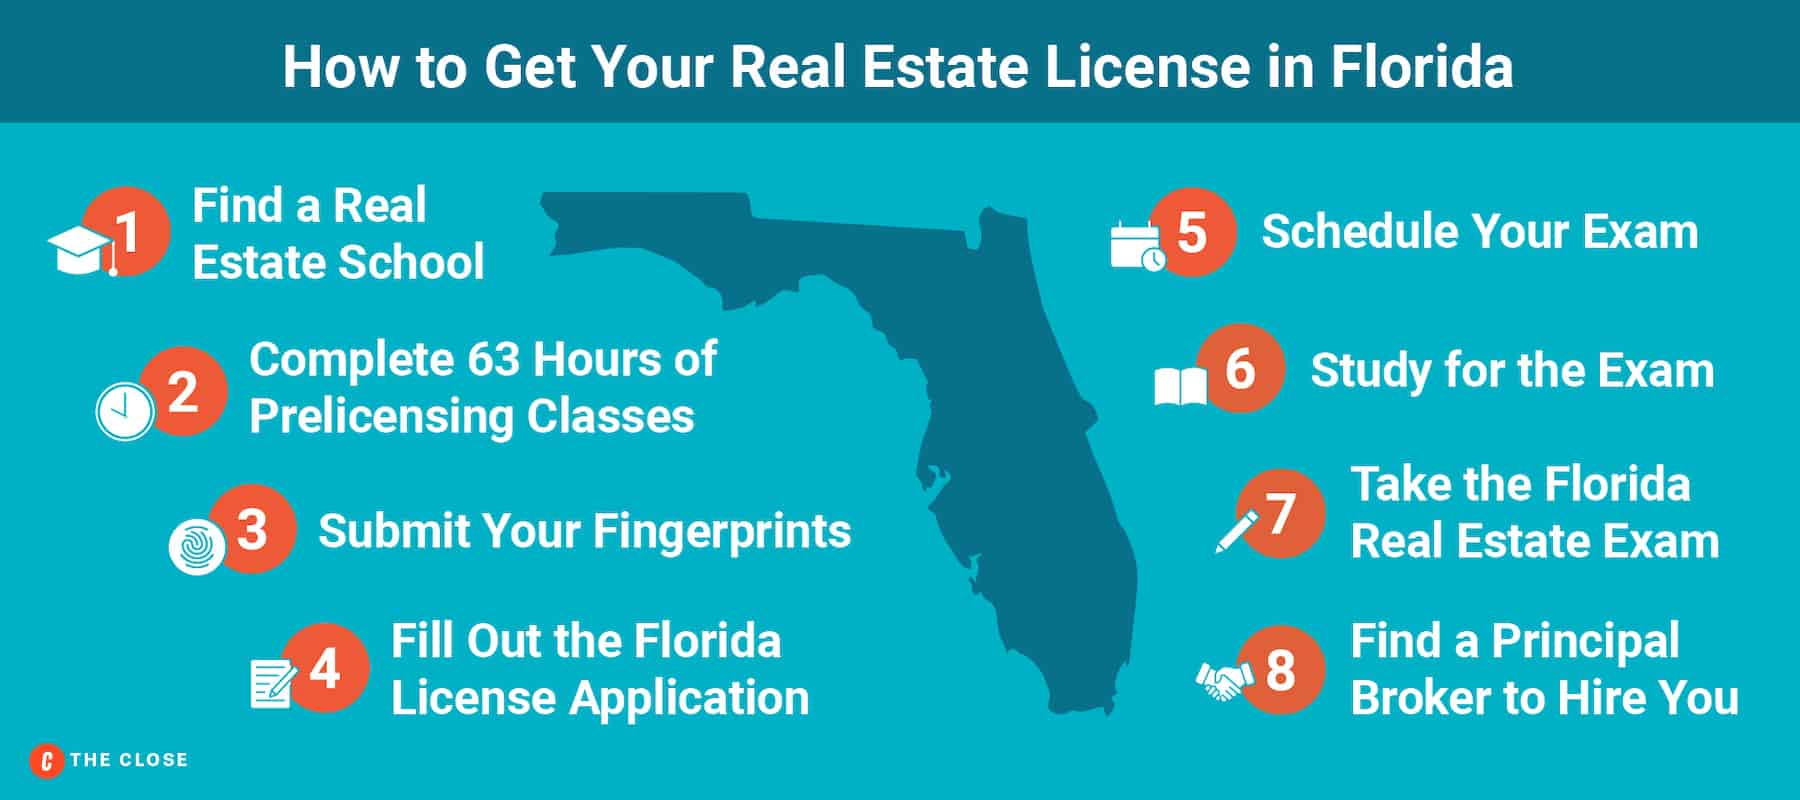 Infographic - How to Get Your Real Estate License in Florida